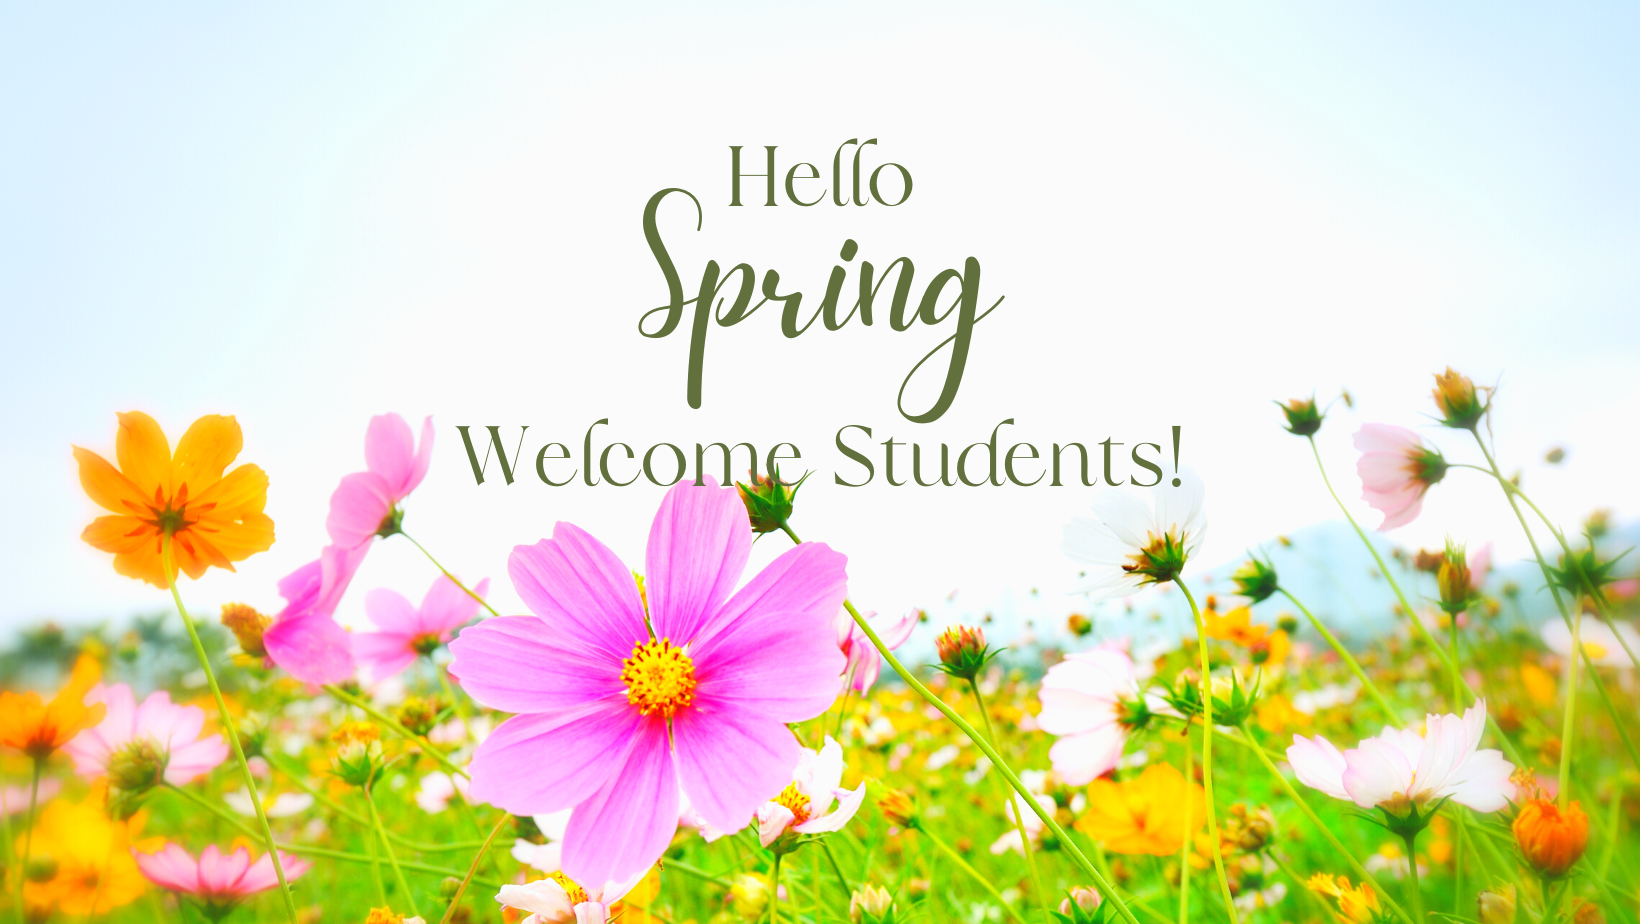 Hello Spring Welcome Students